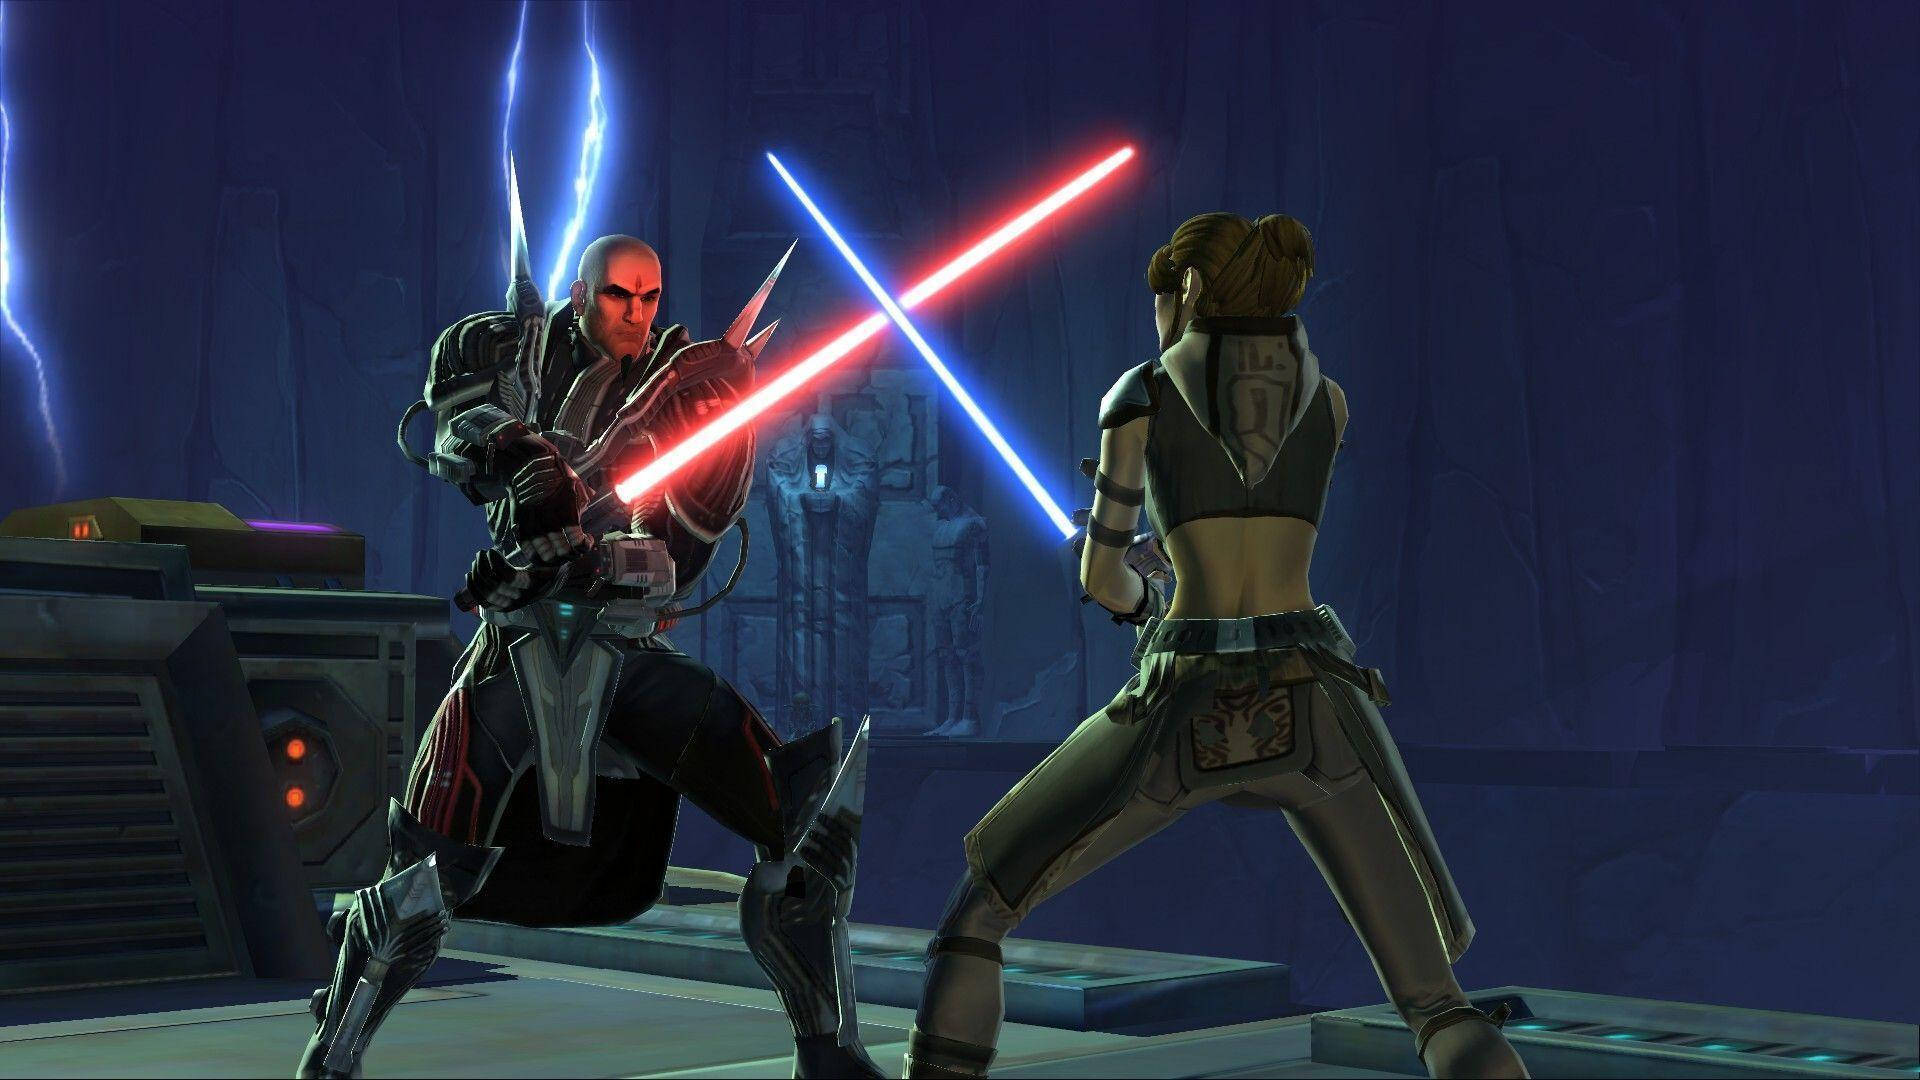 Swtor Sith Against Jedi Background